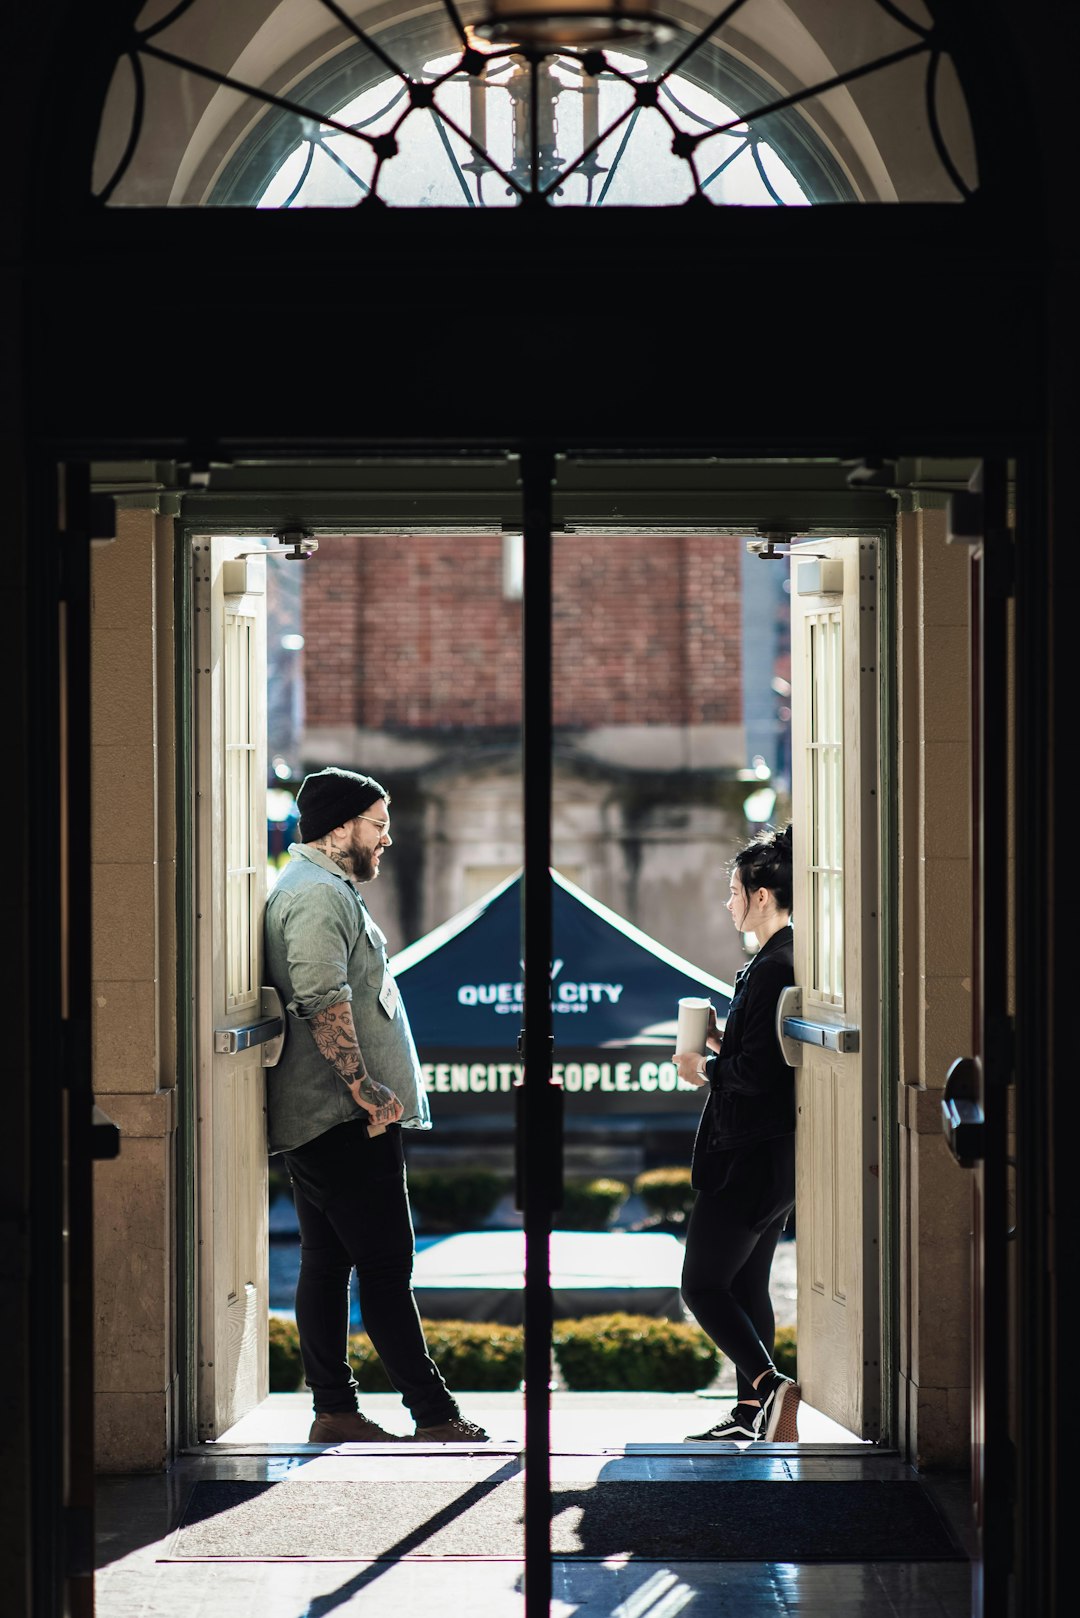 man and woman talking beside the open door during daytime